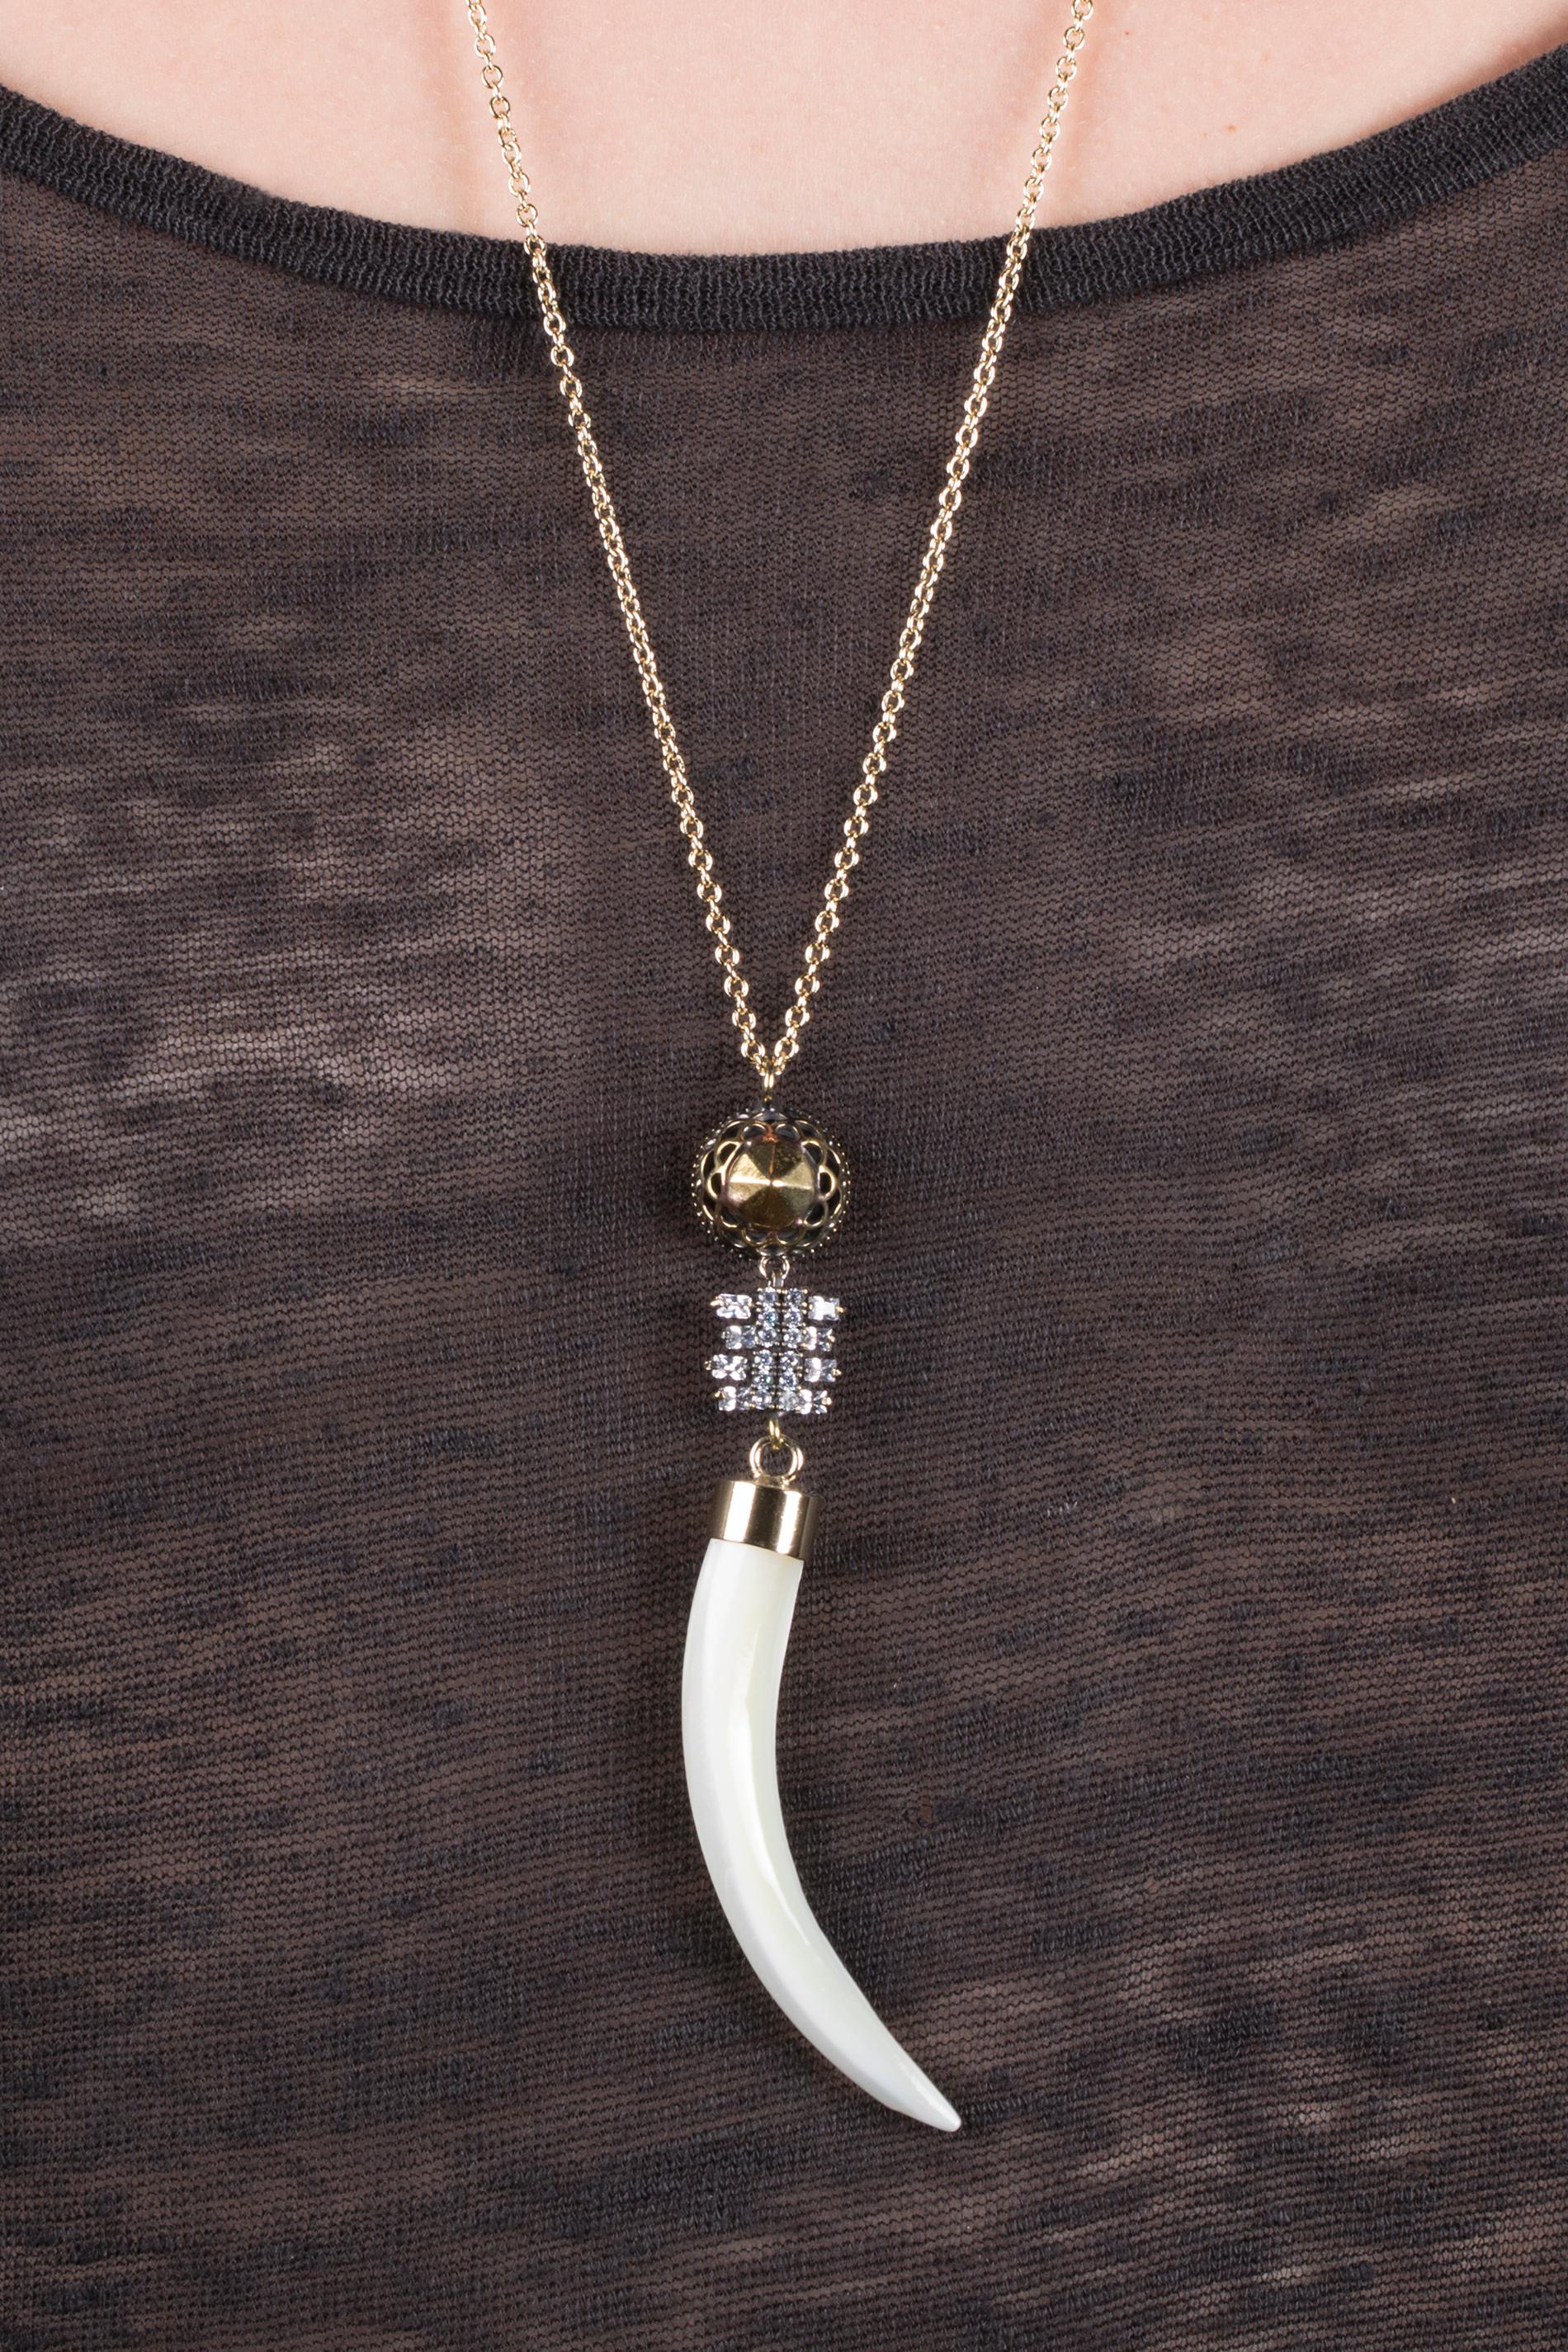 Iosselliani Horn Shaped Nacre Pendant Necklace In New Condition For Sale In Rome, IT